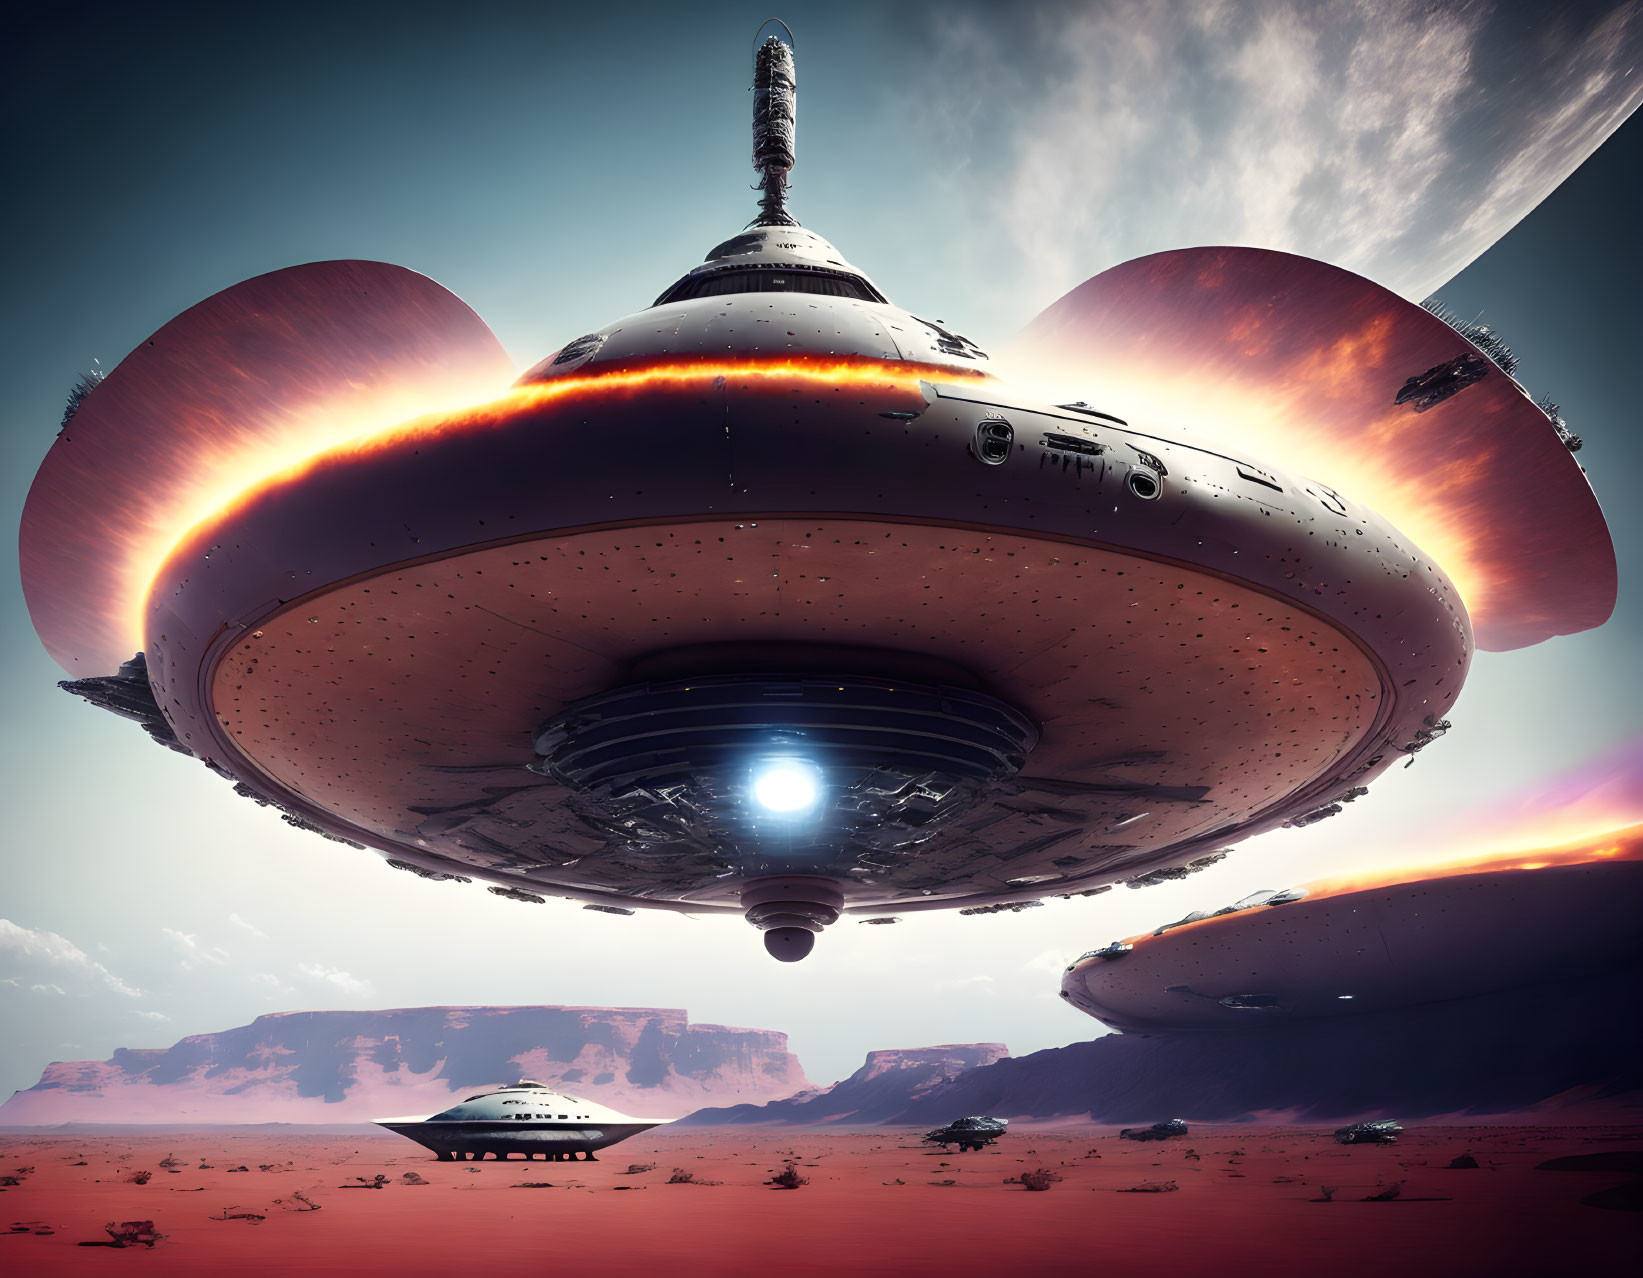 Large flying saucer over desert landscape with celestial bodies in the sky